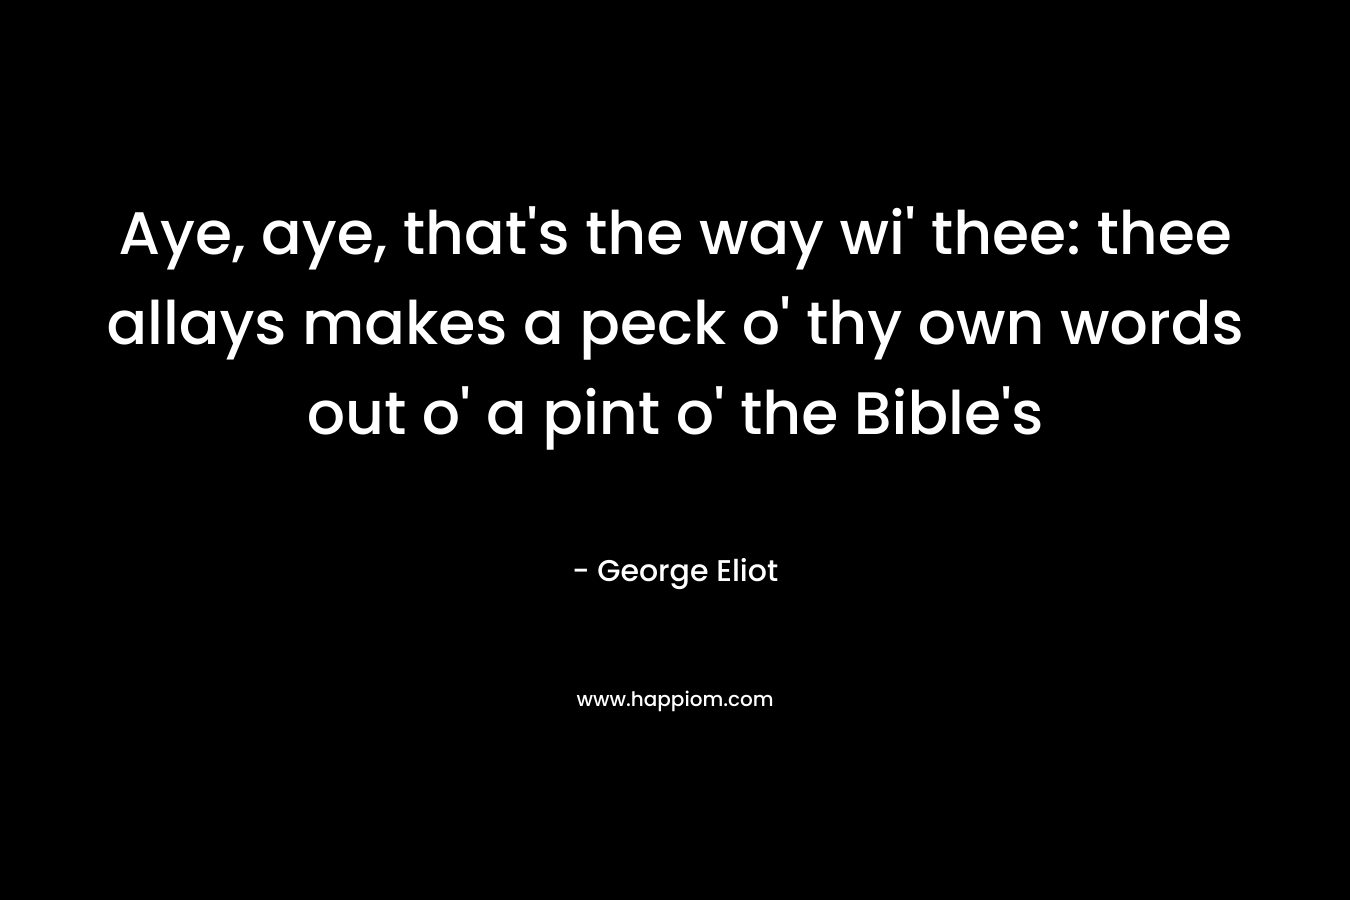 Aye, aye, that's the way wi' thee: thee allays makes a peck o' thy own words out o' a pint o' the Bible's